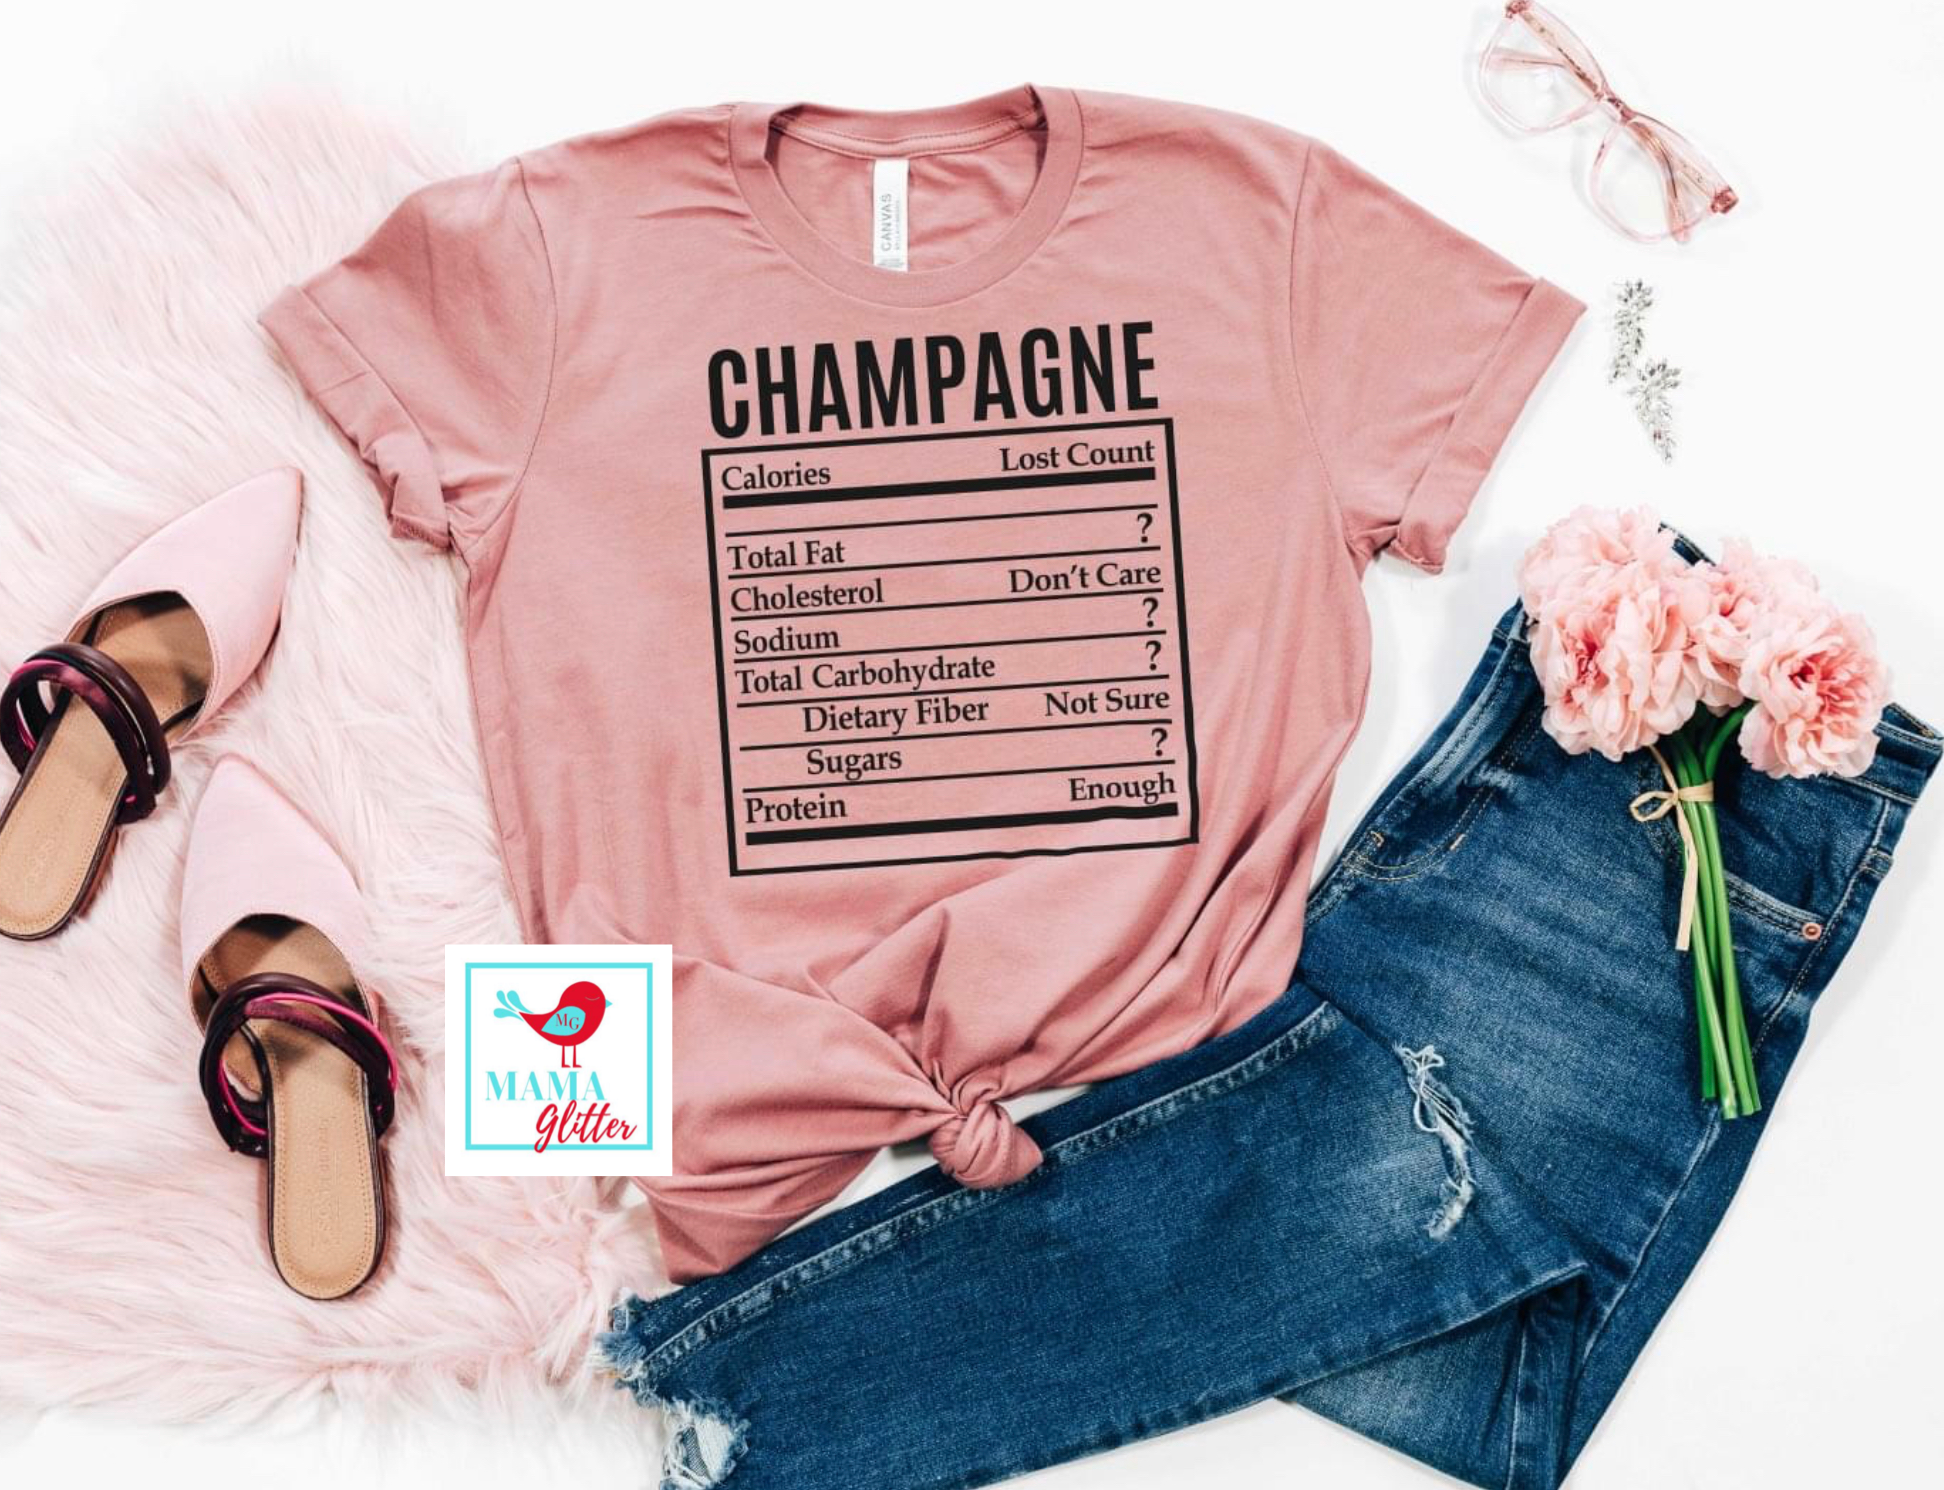 Champagne - Nutritional Information